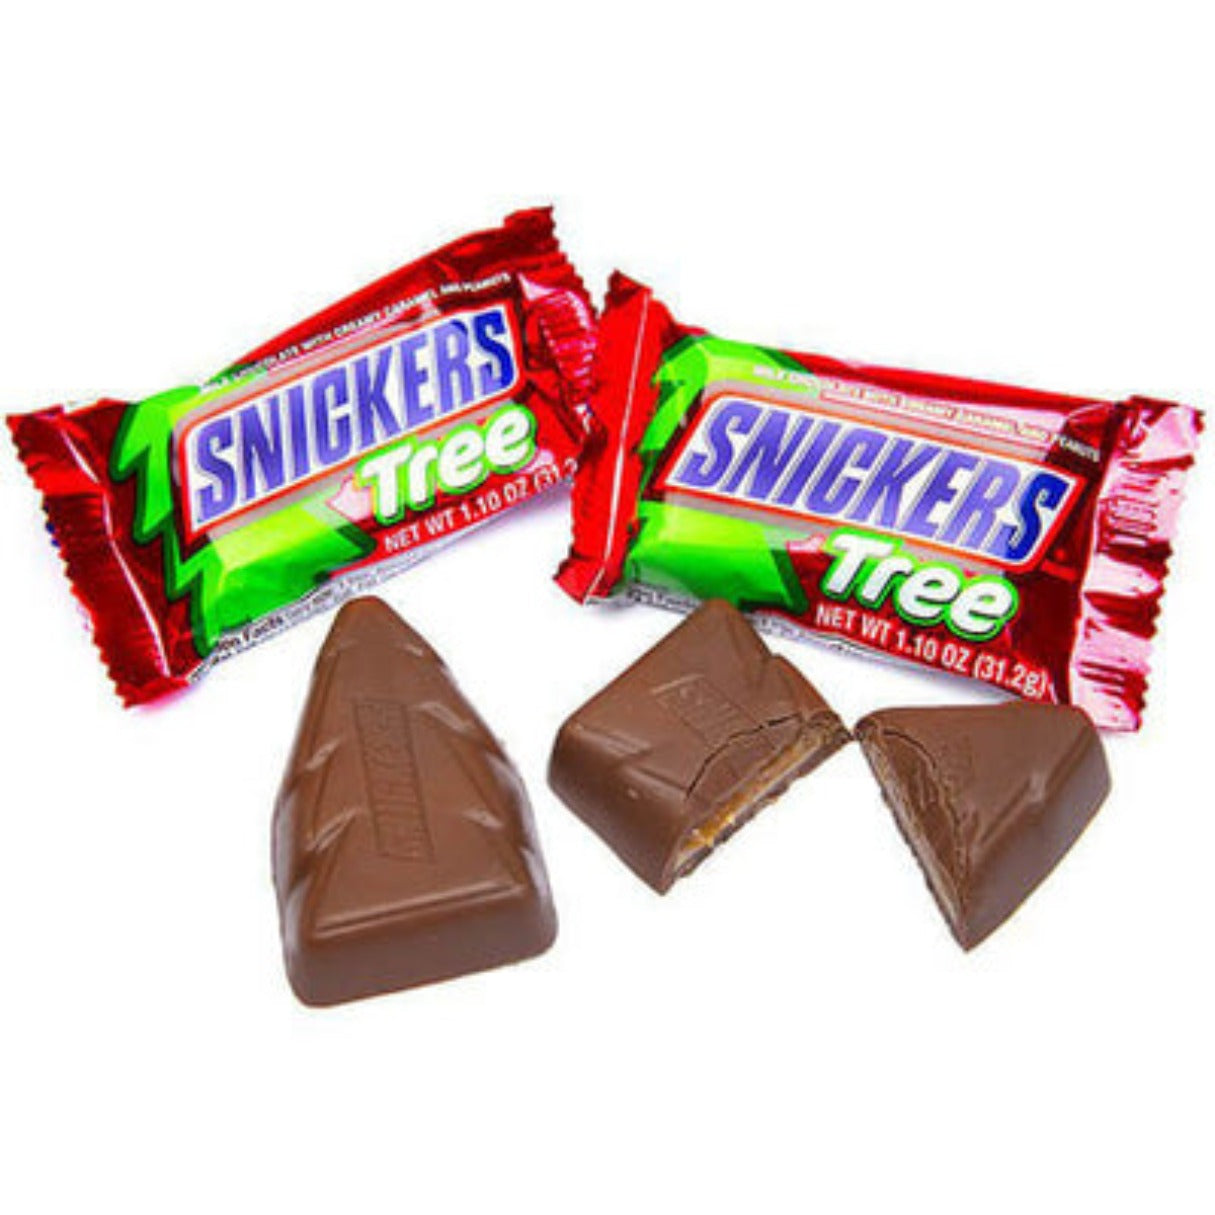 Snickers Trees Candy Bars 1.1oz - 24ct